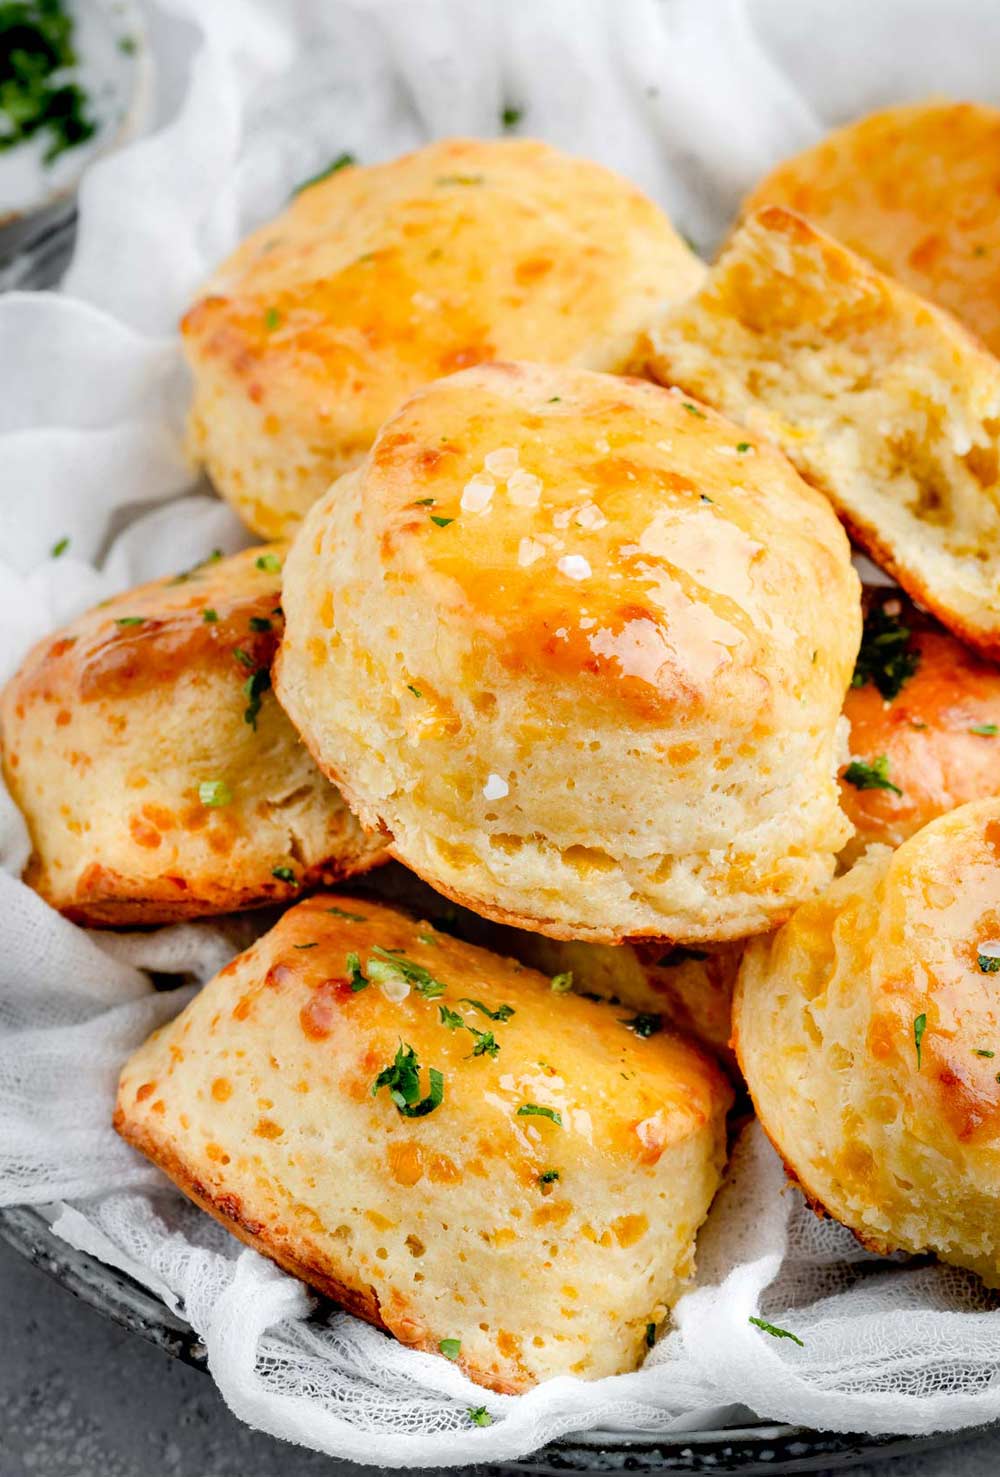 A basket filled with warm Buttermilk Cheddar Biscuits, golden and flaky, ready to be enjoyed at any meal.